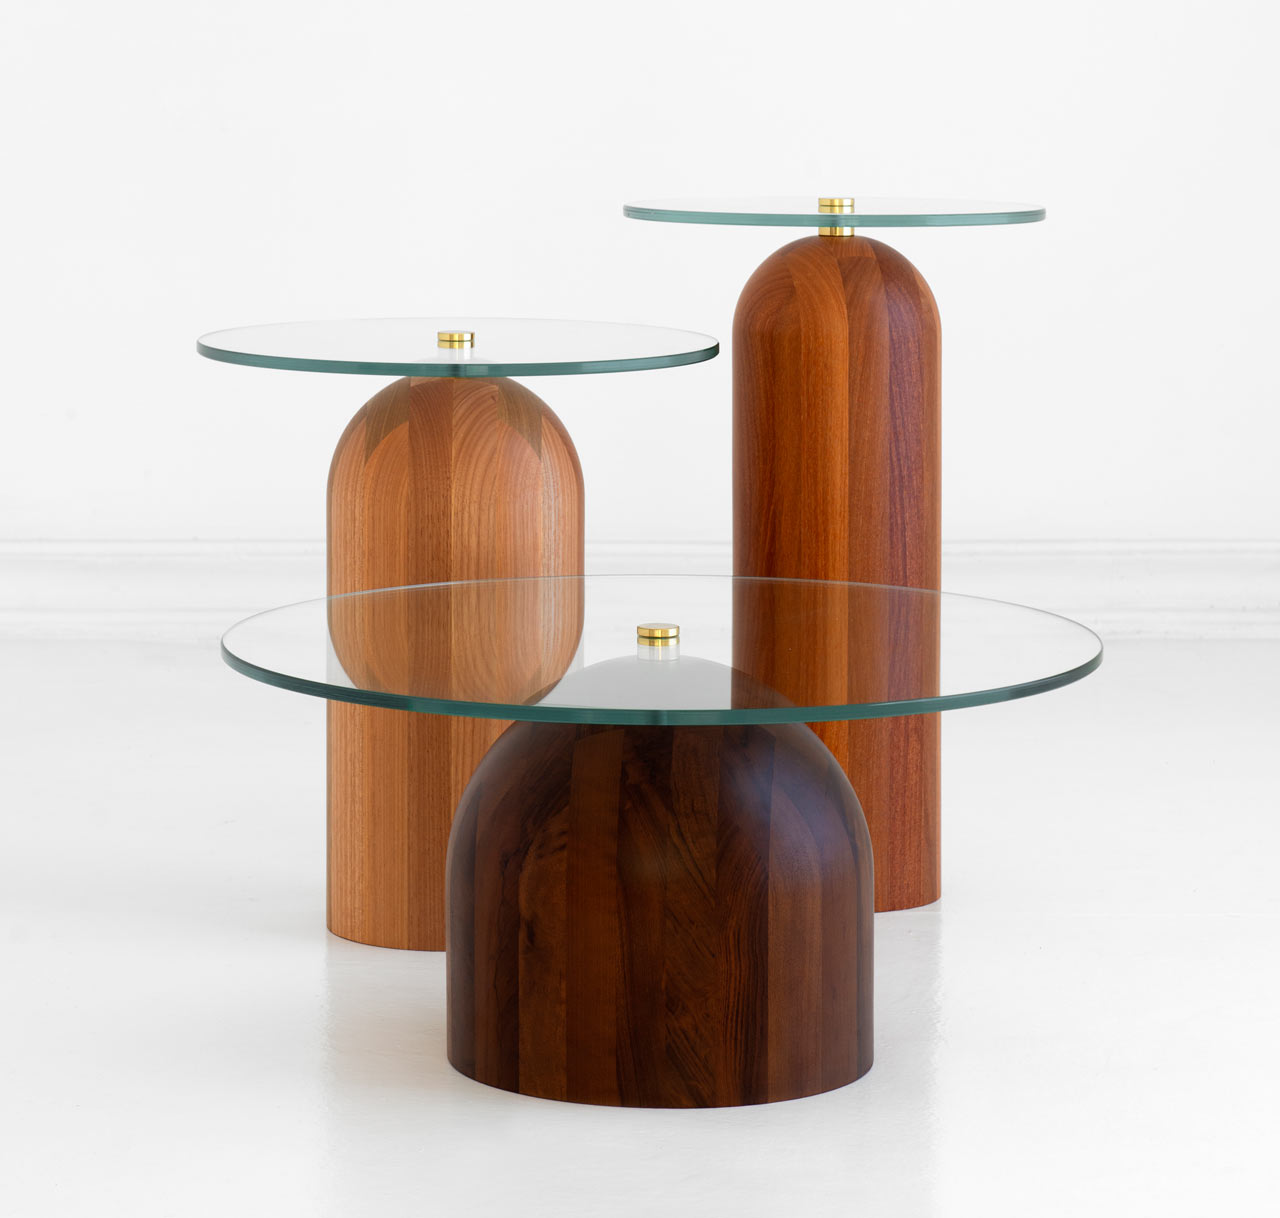 The Toco Table Combines Wooden Bases with Glass Tops